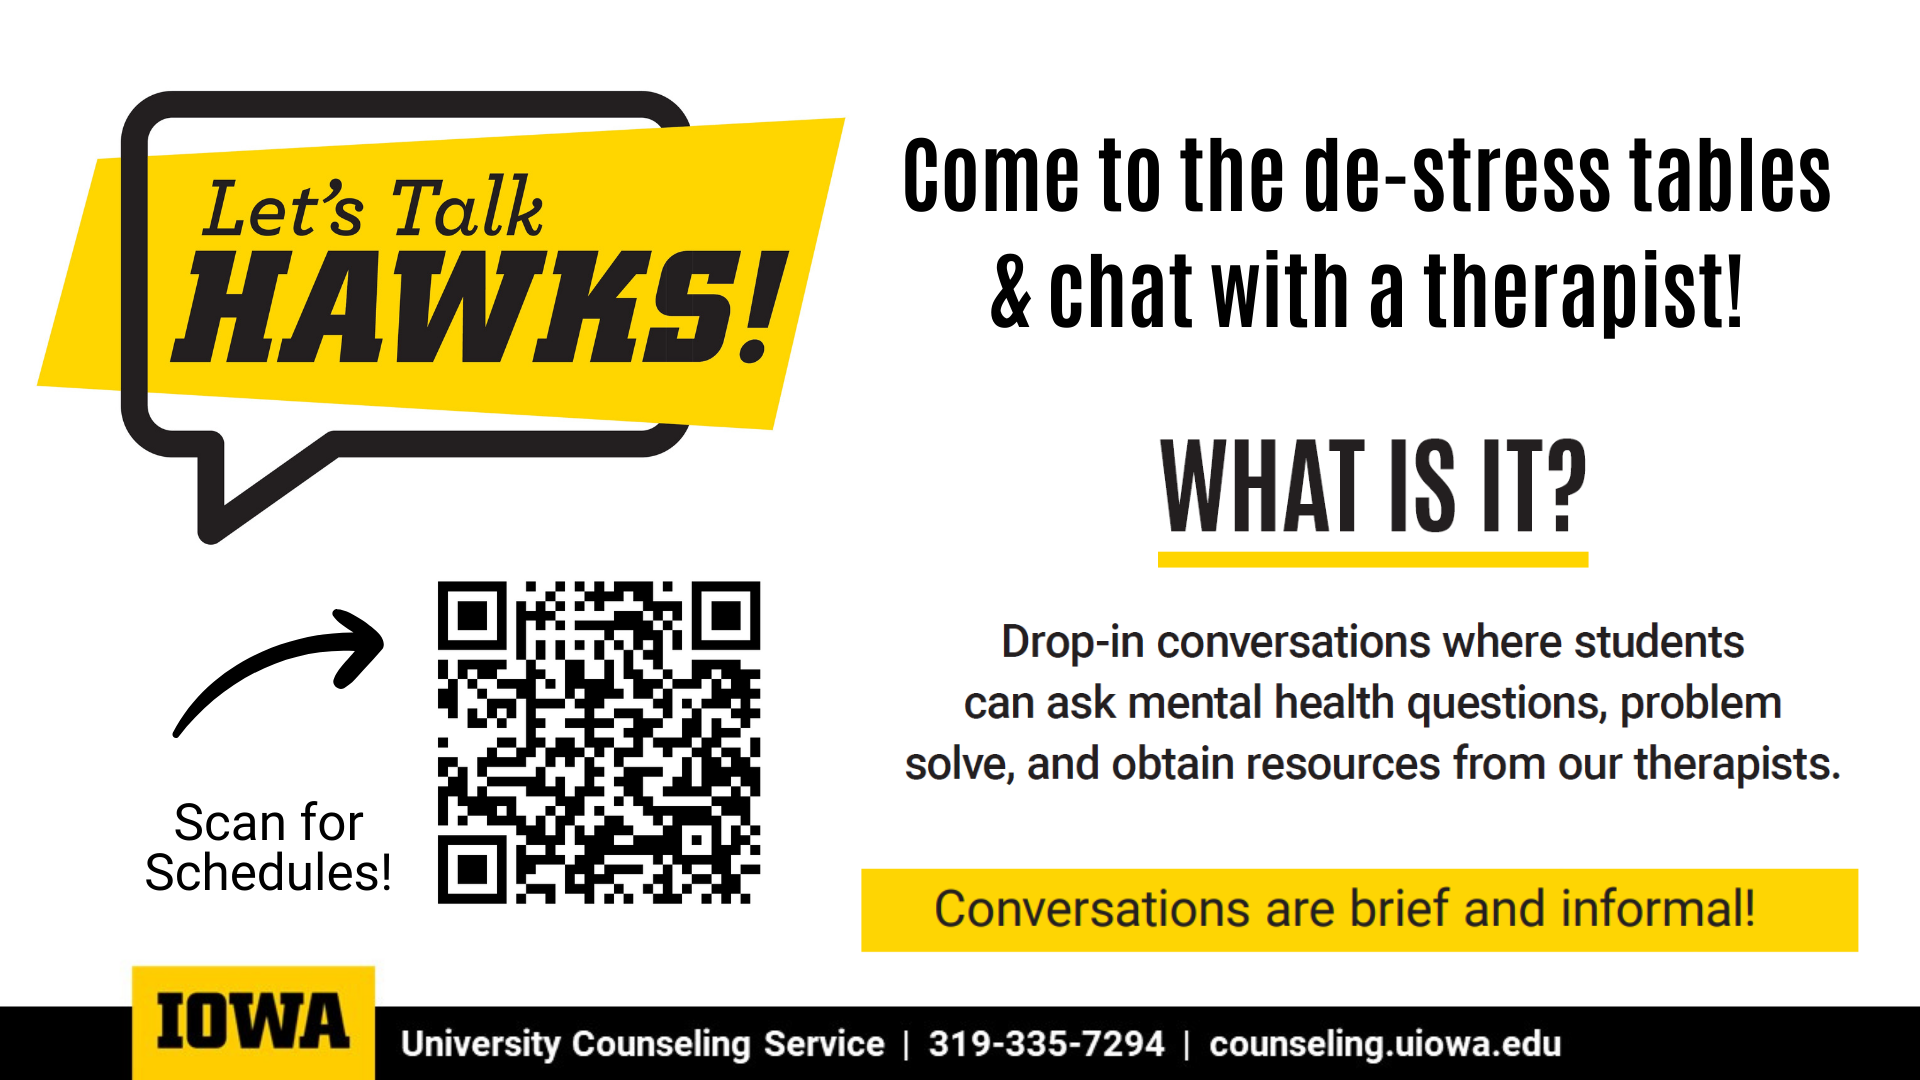 Let's Talk Hawks. Come to the de-stress tables & chat with a therapist.